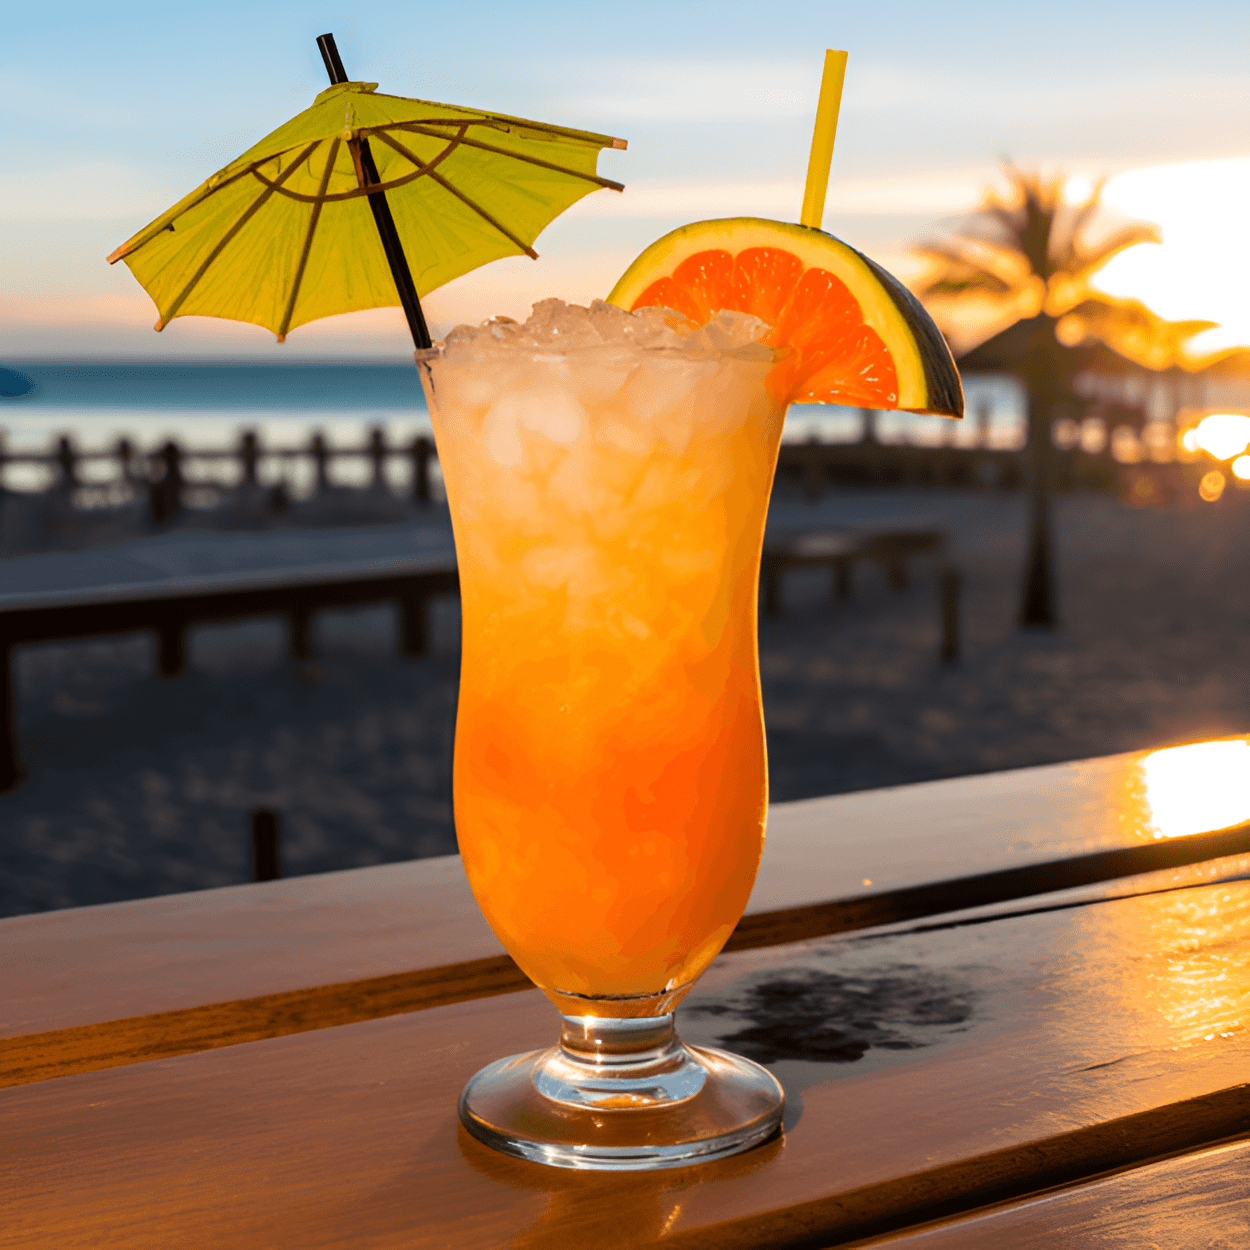 Bama Breeze Cocktail Recipe - The Bama Breeze is a sweet and fruity cocktail with a hint of sourness from the lime. It has a strong tropical flavor, thanks to the pineapple and orange juice, and the rum adds a nice kick.